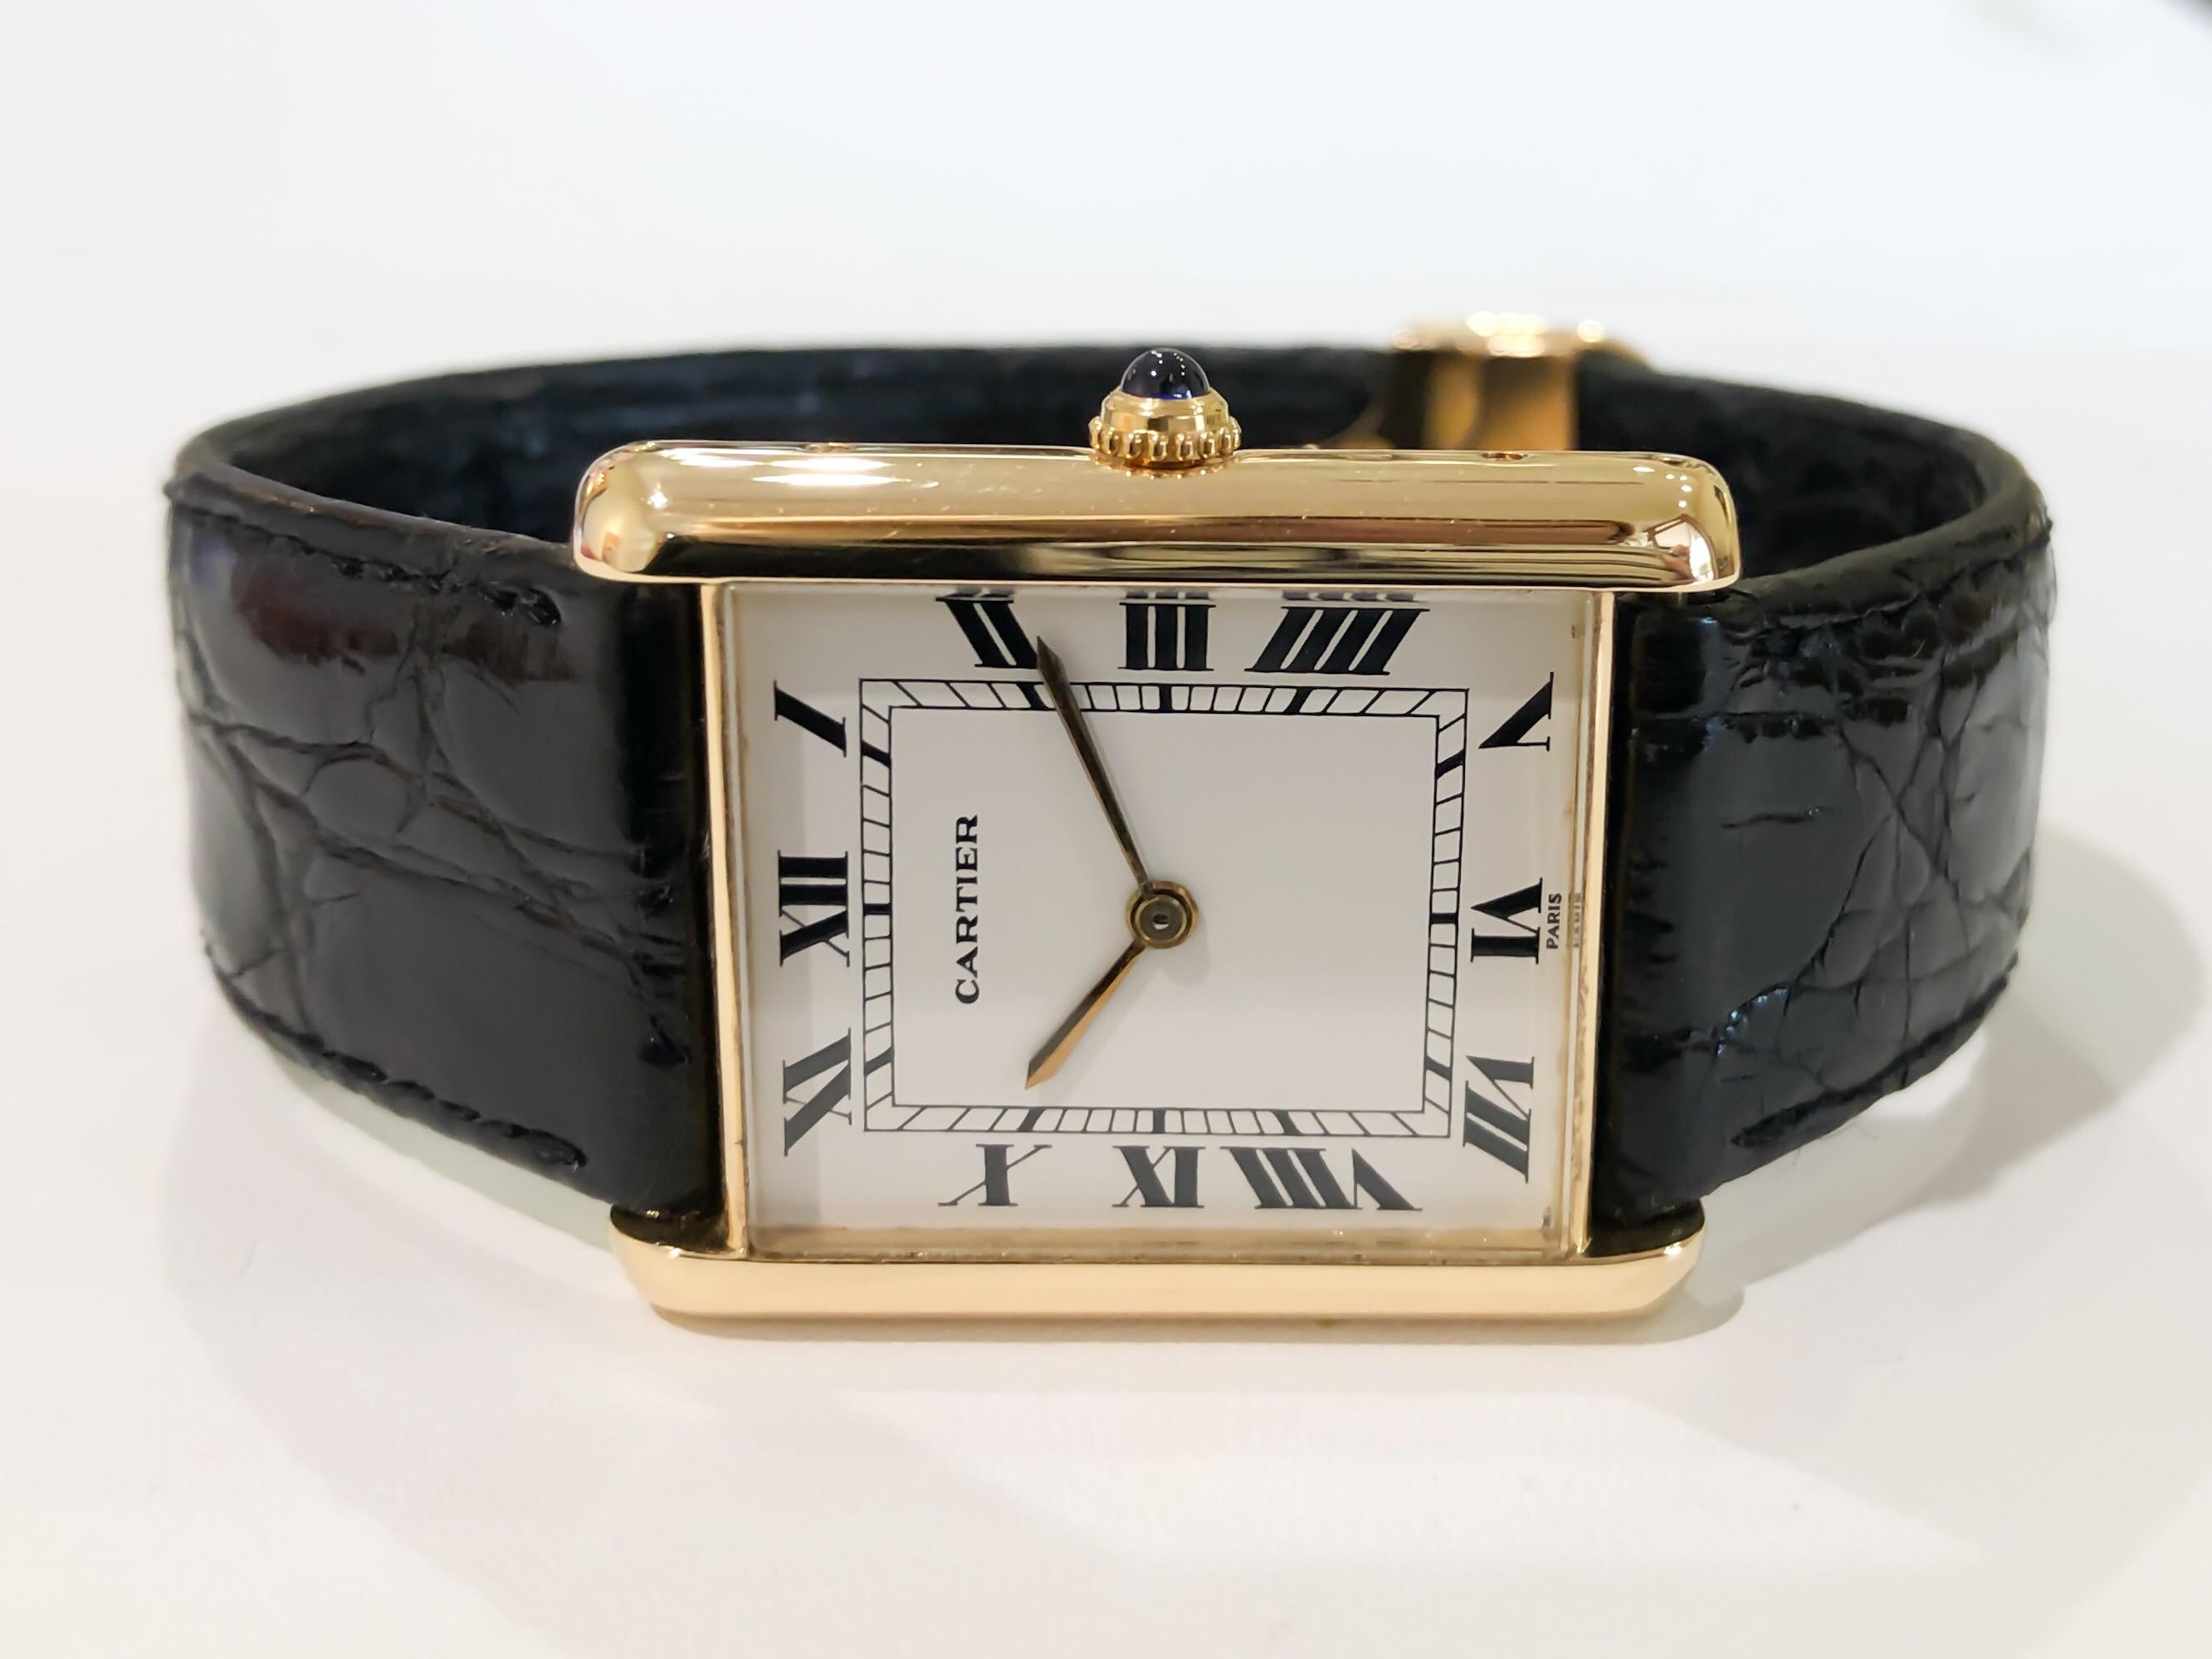 Rare JUMBO Louis Cartier Tank on a black aftermarket strap. Great for a man or woman, stylish oversized look. Fits 7 1/2